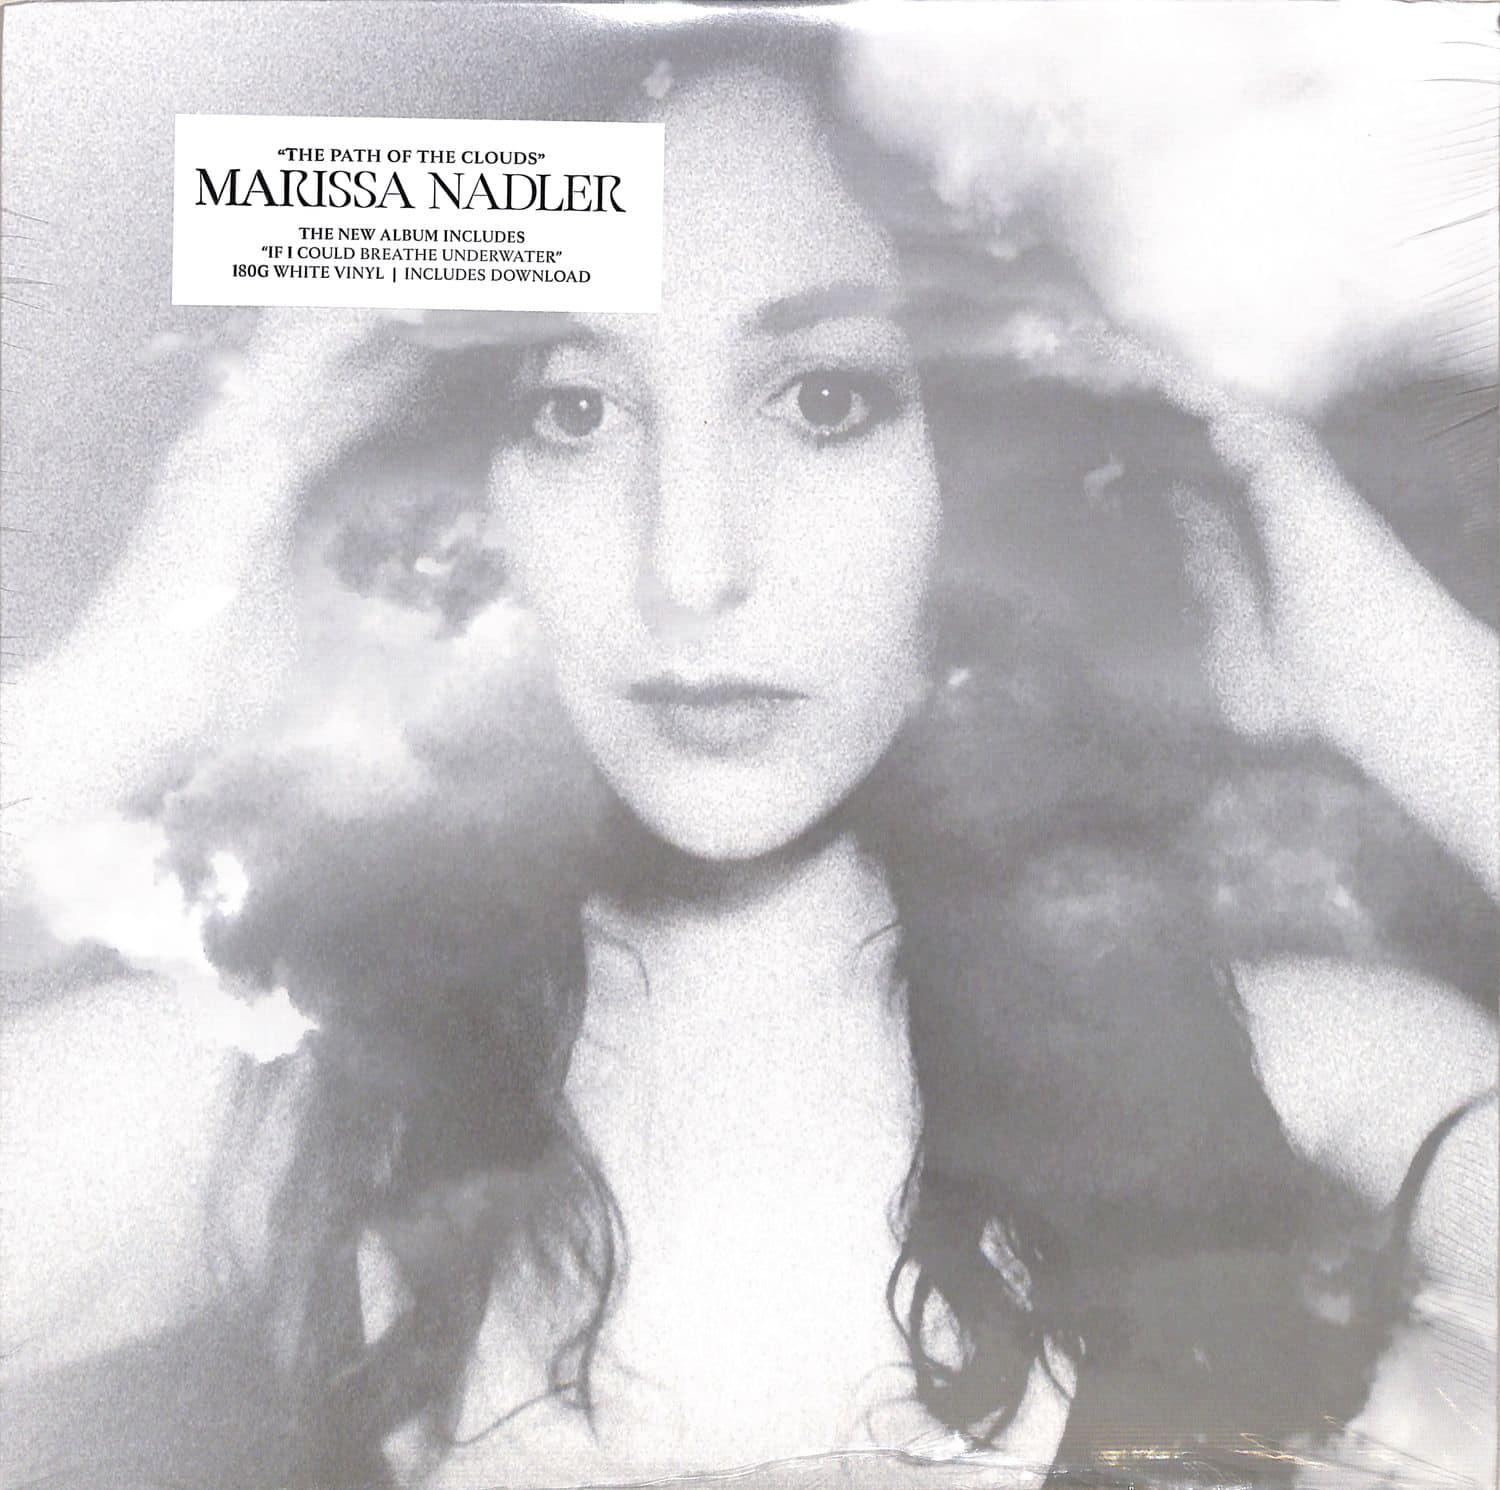 Marissa Nadler - THE PATH OF THE CLOUDS 